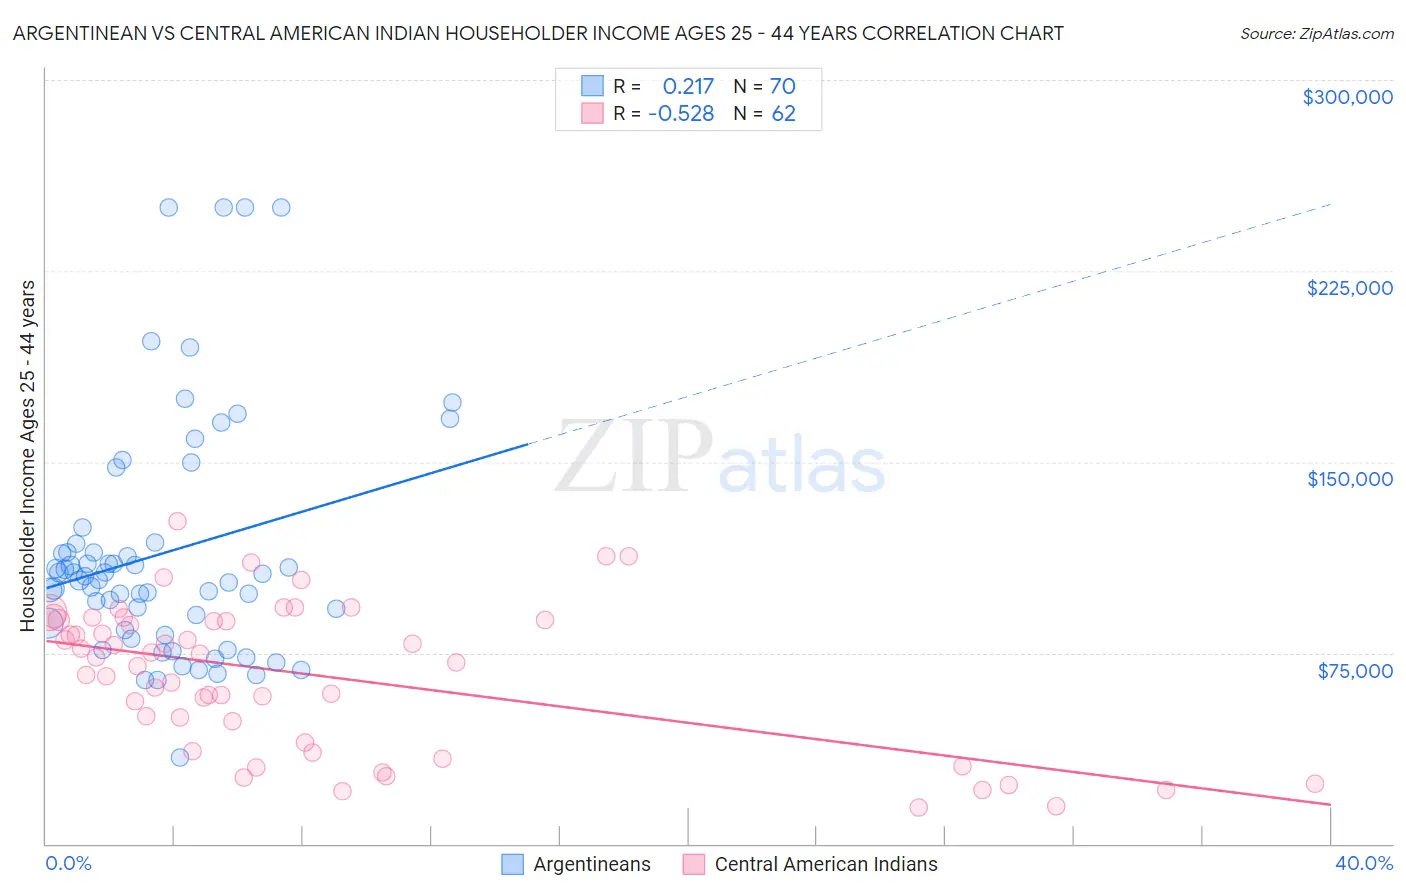 Argentinean vs Central American Indian Householder Income Ages 25 - 44 years